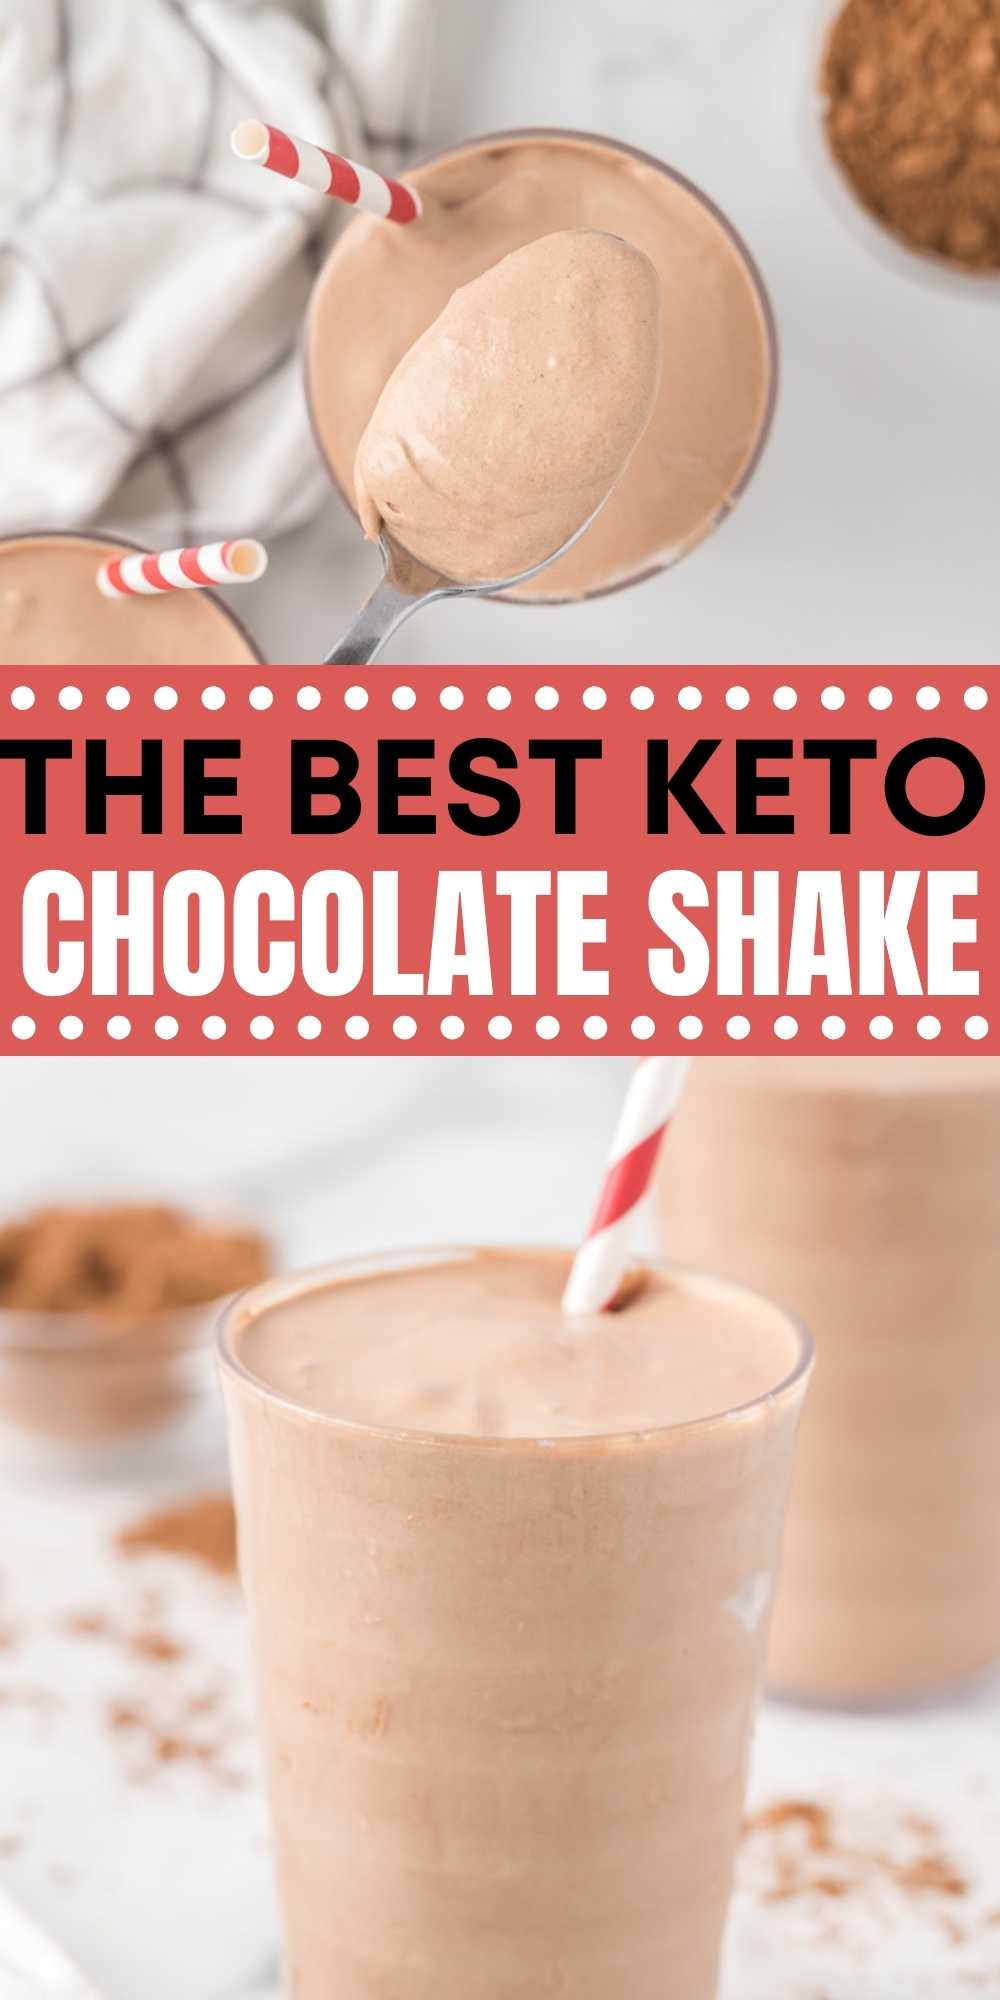 Keto Chocolate Shake Recipe. Try this Keto Shake Recipe for dessert or breakfast. It's creamy and delicious while being so easy to make! You will love this low carb and keto friendly shake recipe.  #eatingonadime #ketorecipes #dessertsrecipes #lowcarbrecipes 
